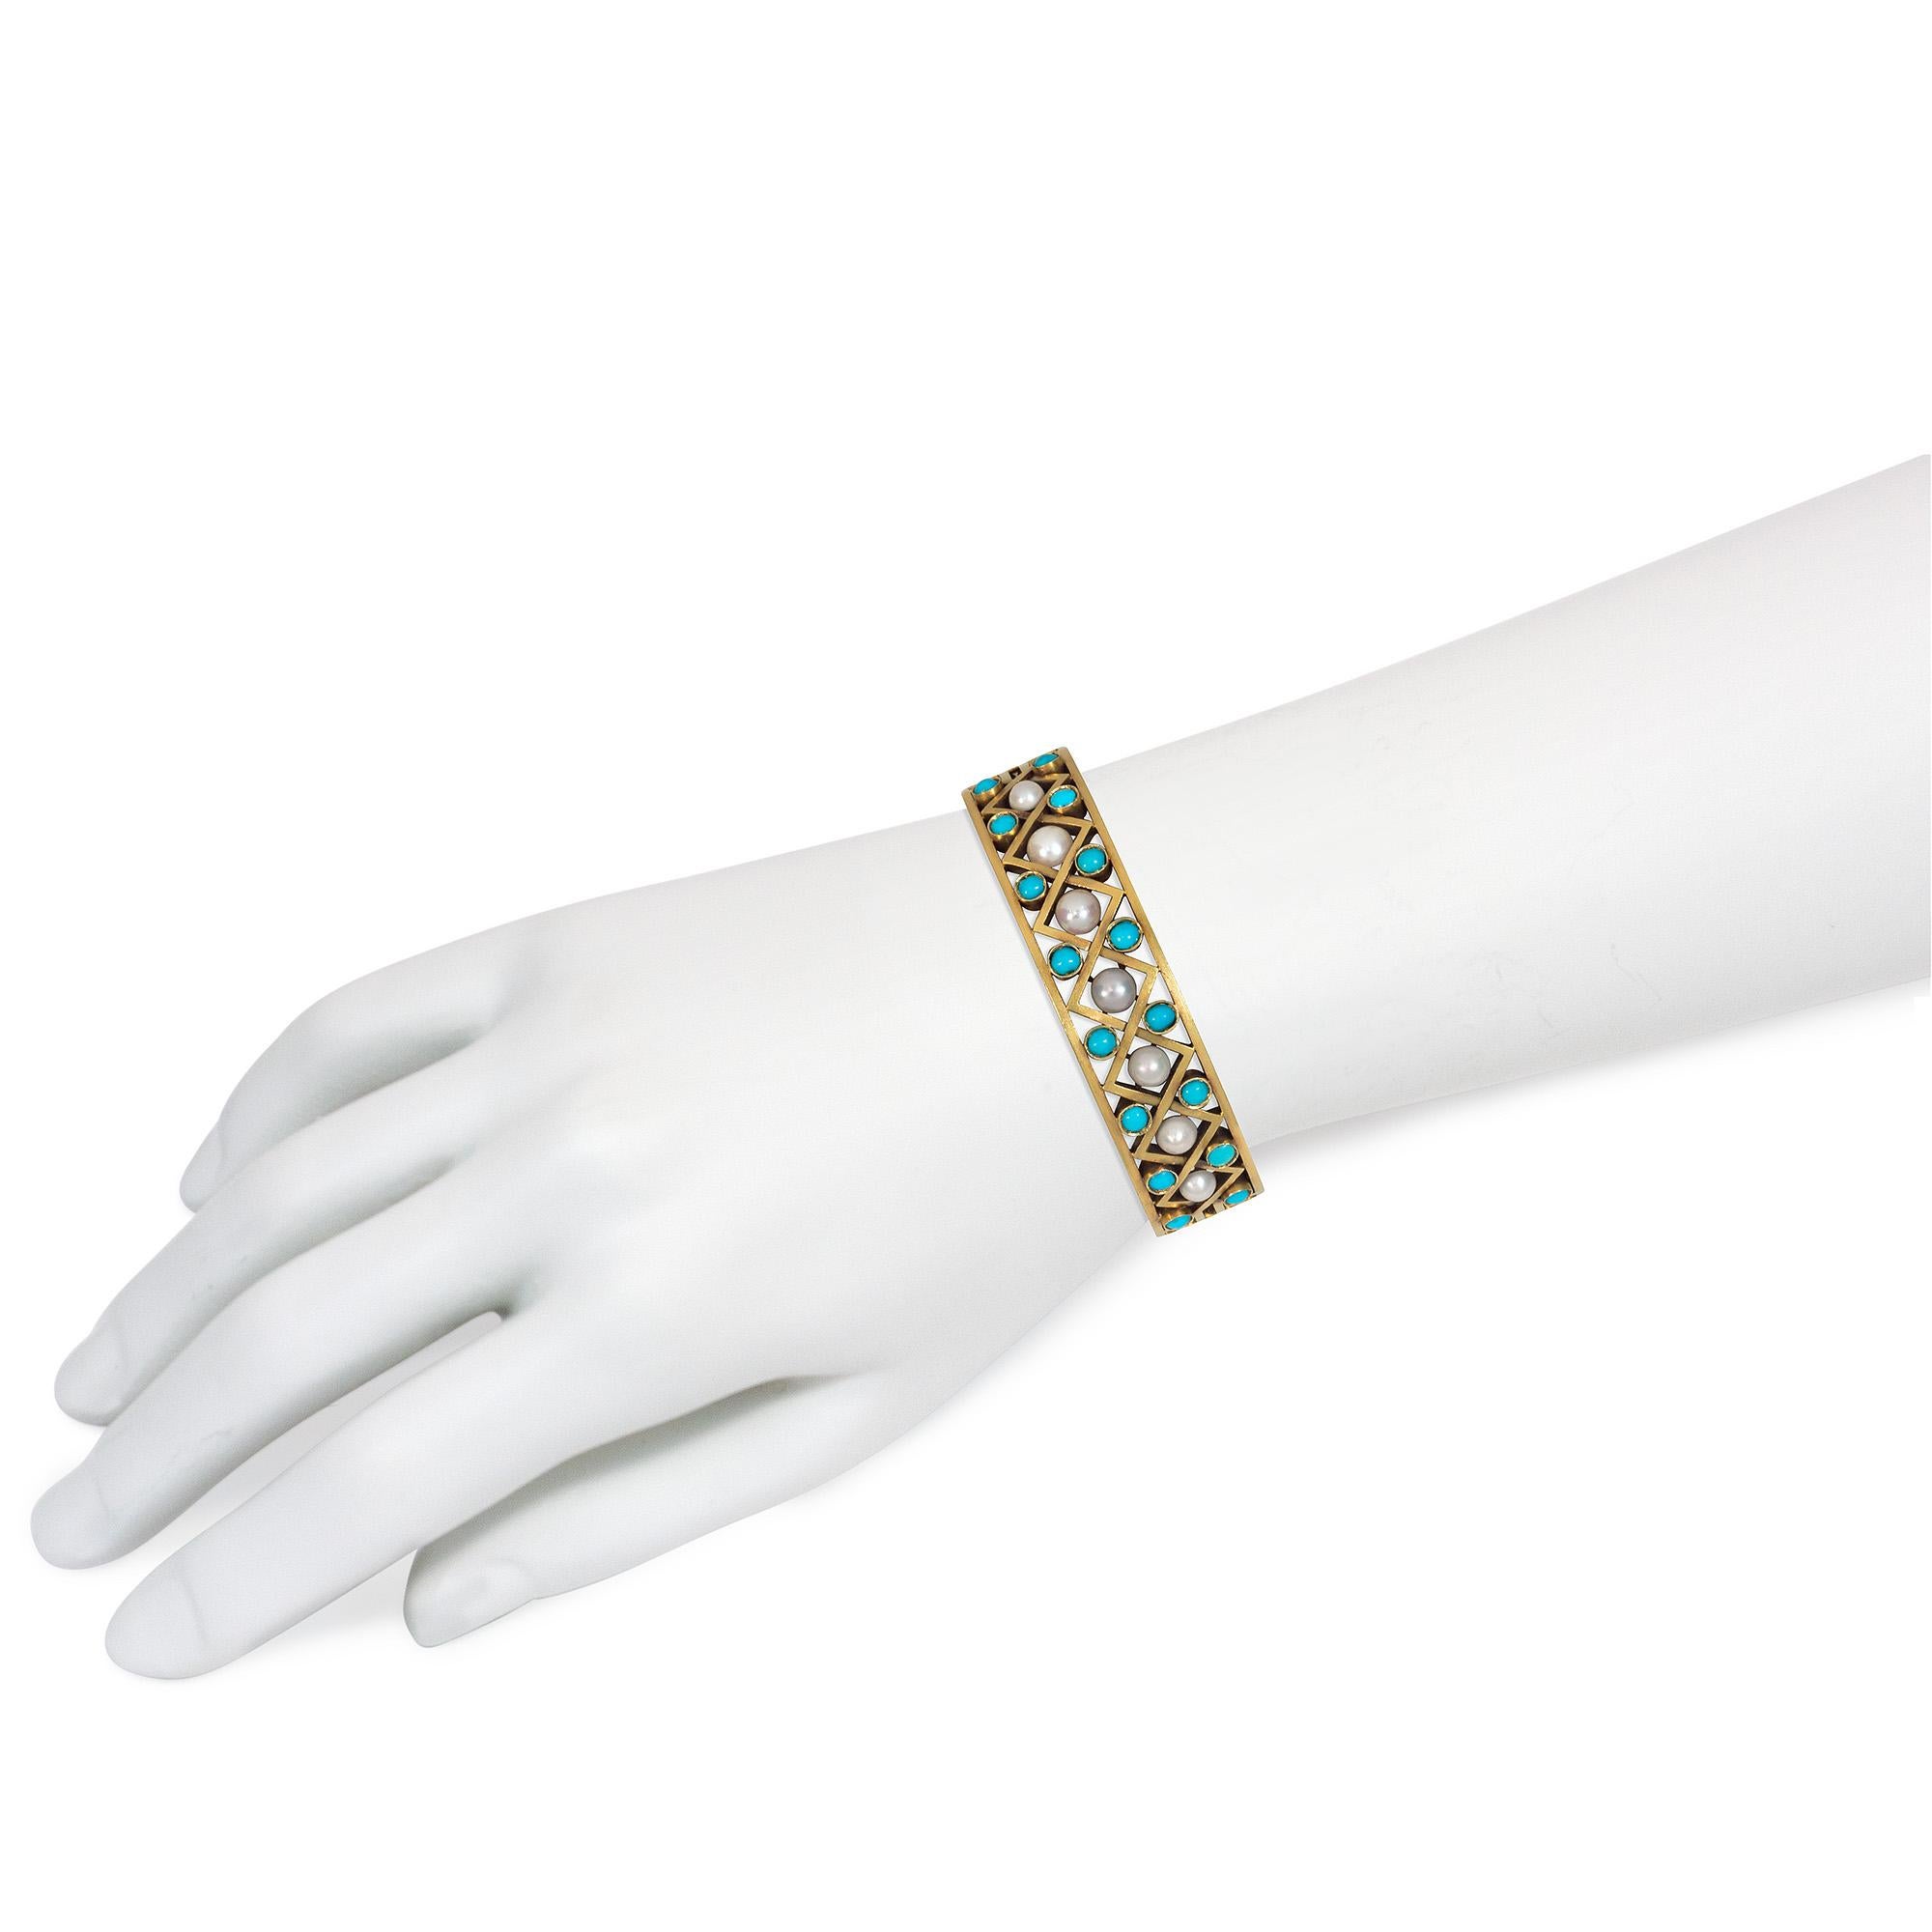 Victorian Antique Gold, Turquoise, and Pearl Openwork Bangle Bracelet with Lattice Design For Sale